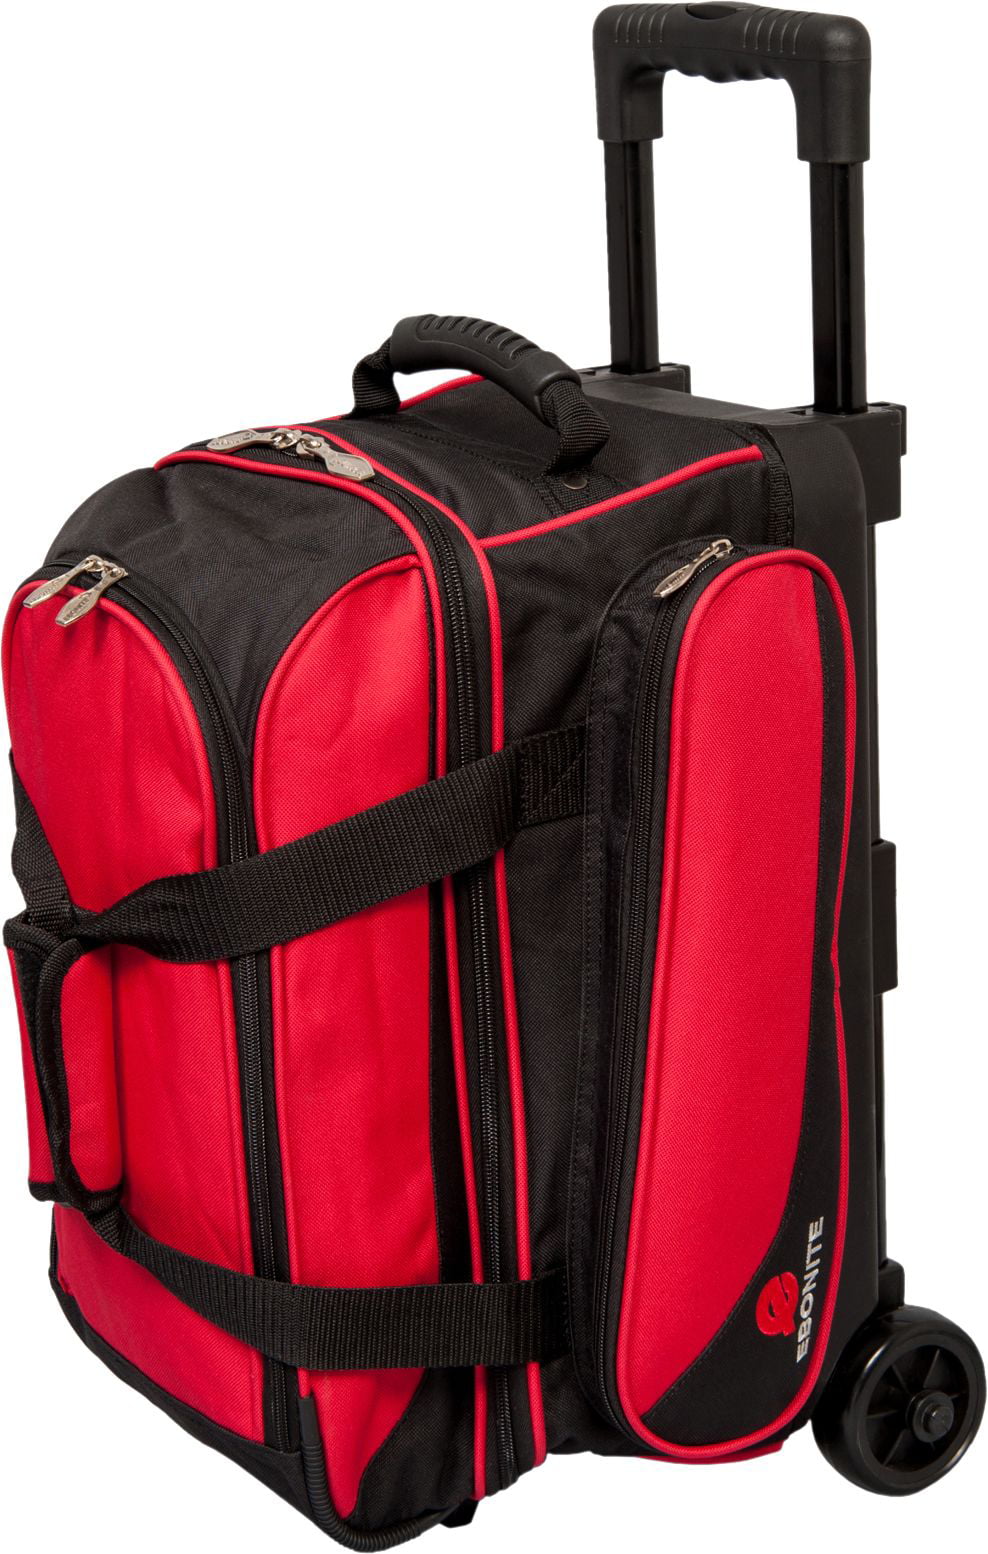 Ebonite 2 Ball Roller Bowling Bag With Wheels Red 5 Year for sale online 